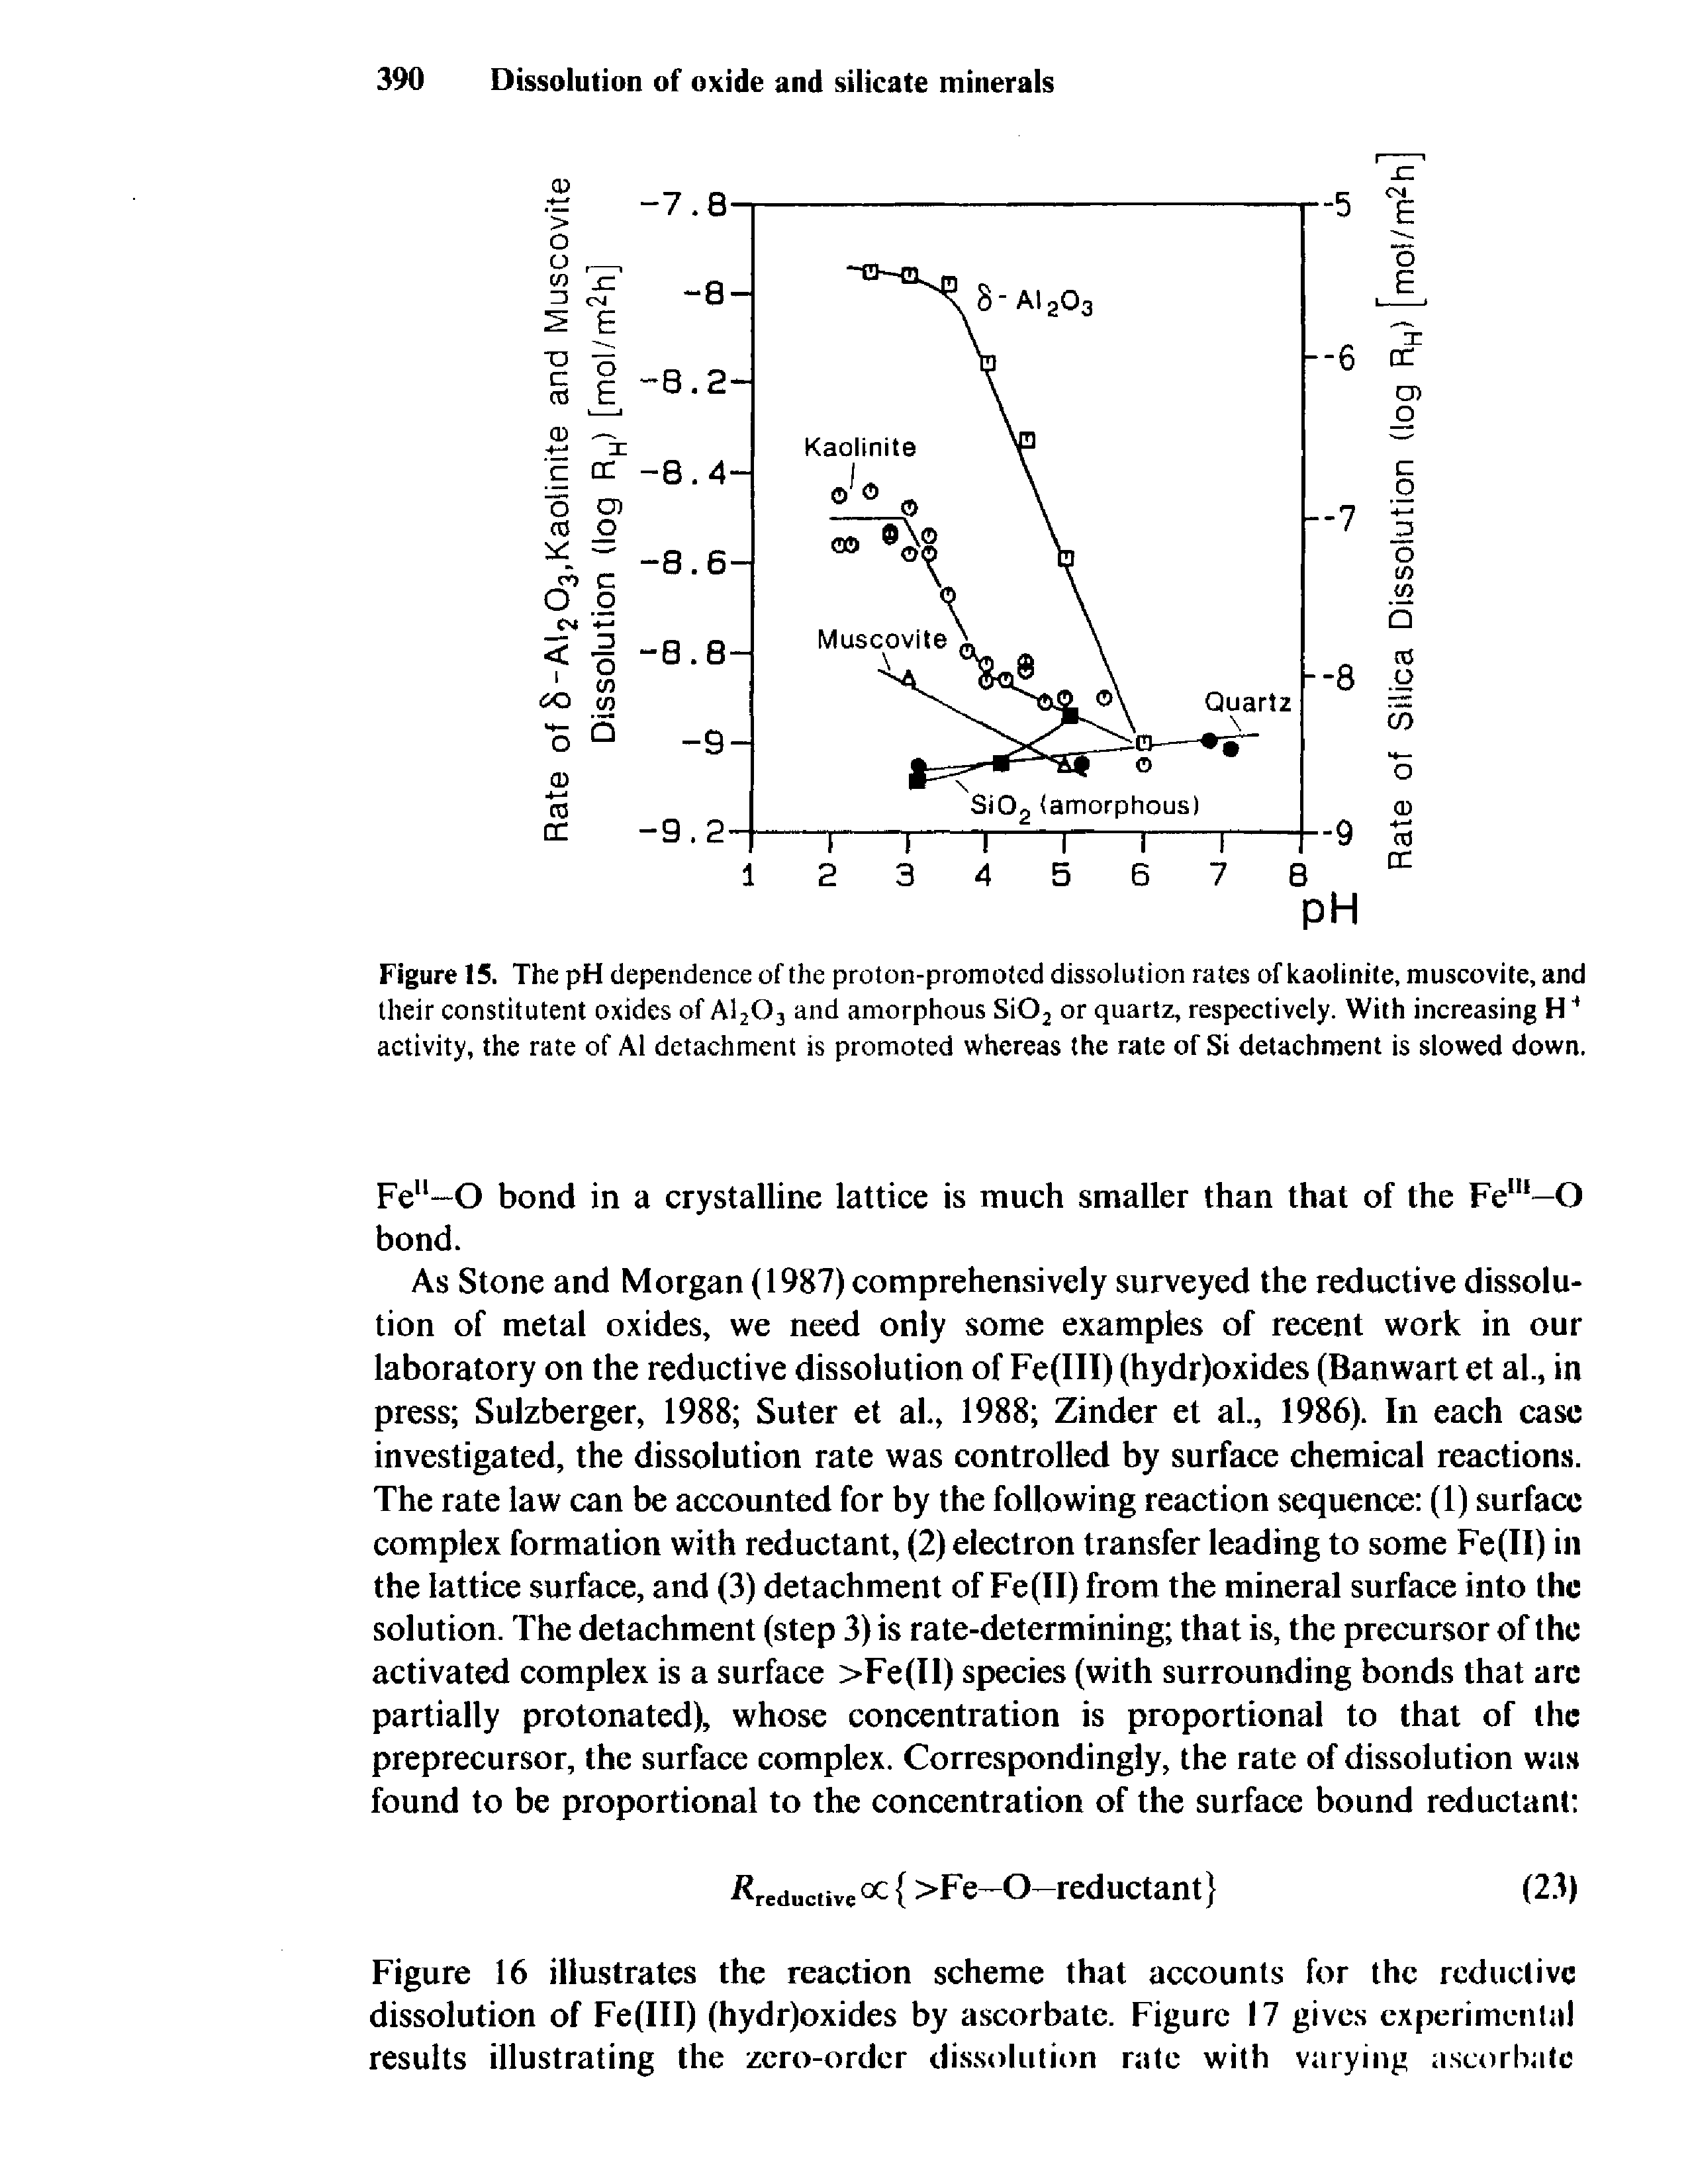 Figure 15. The pH dependence of the proton-promoted dissolution rates ofkaolinite, muscovite, and their constitutent oxides of A1203 and amorphous Si02 or quartz, respectively. With increasing H4 activity, the rate of A1 detachment is promoted whereas the rate of Si detachment is slowed down.